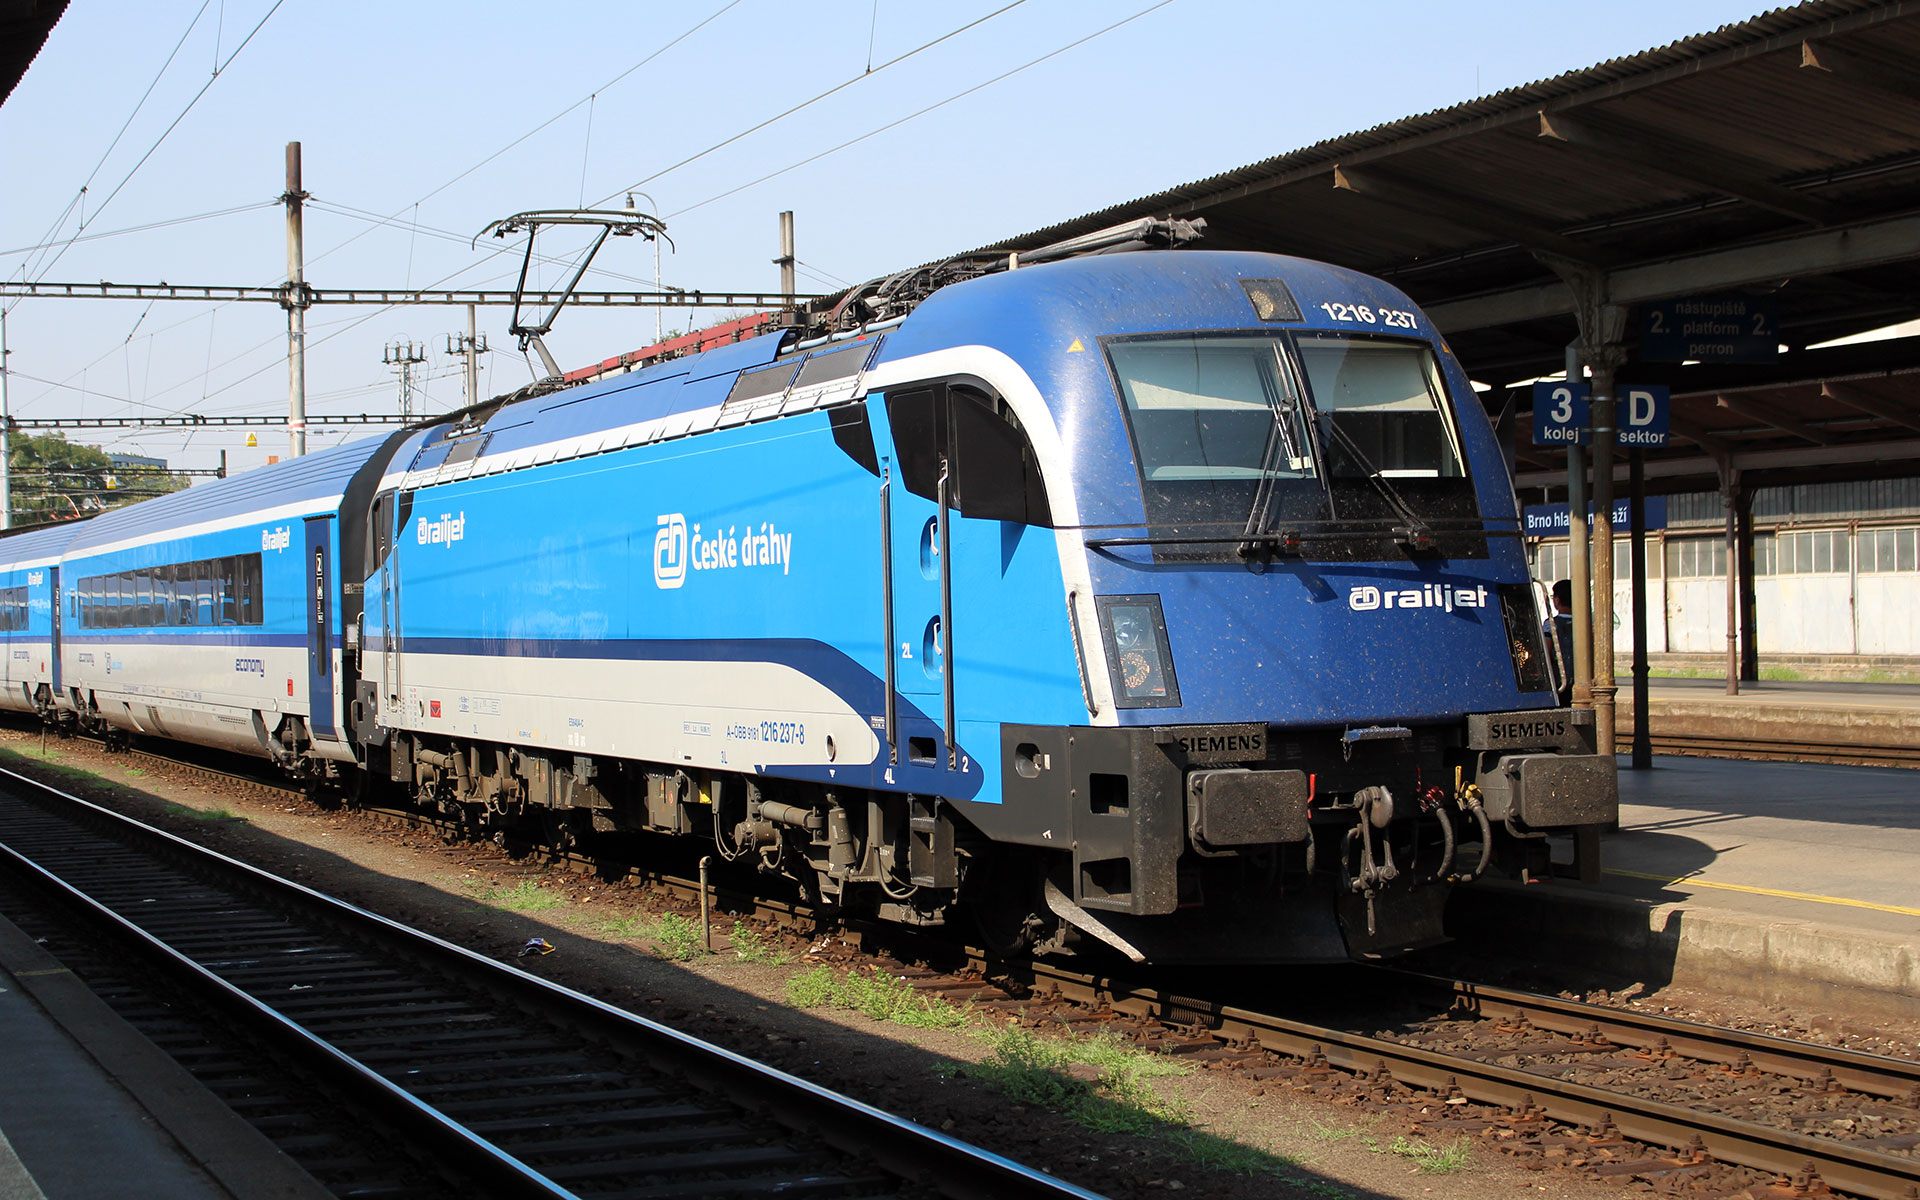 A Railjet operated by Czech Railways (CD). Here at Brno station (photo © Michal Kapes / dreamstime.com).